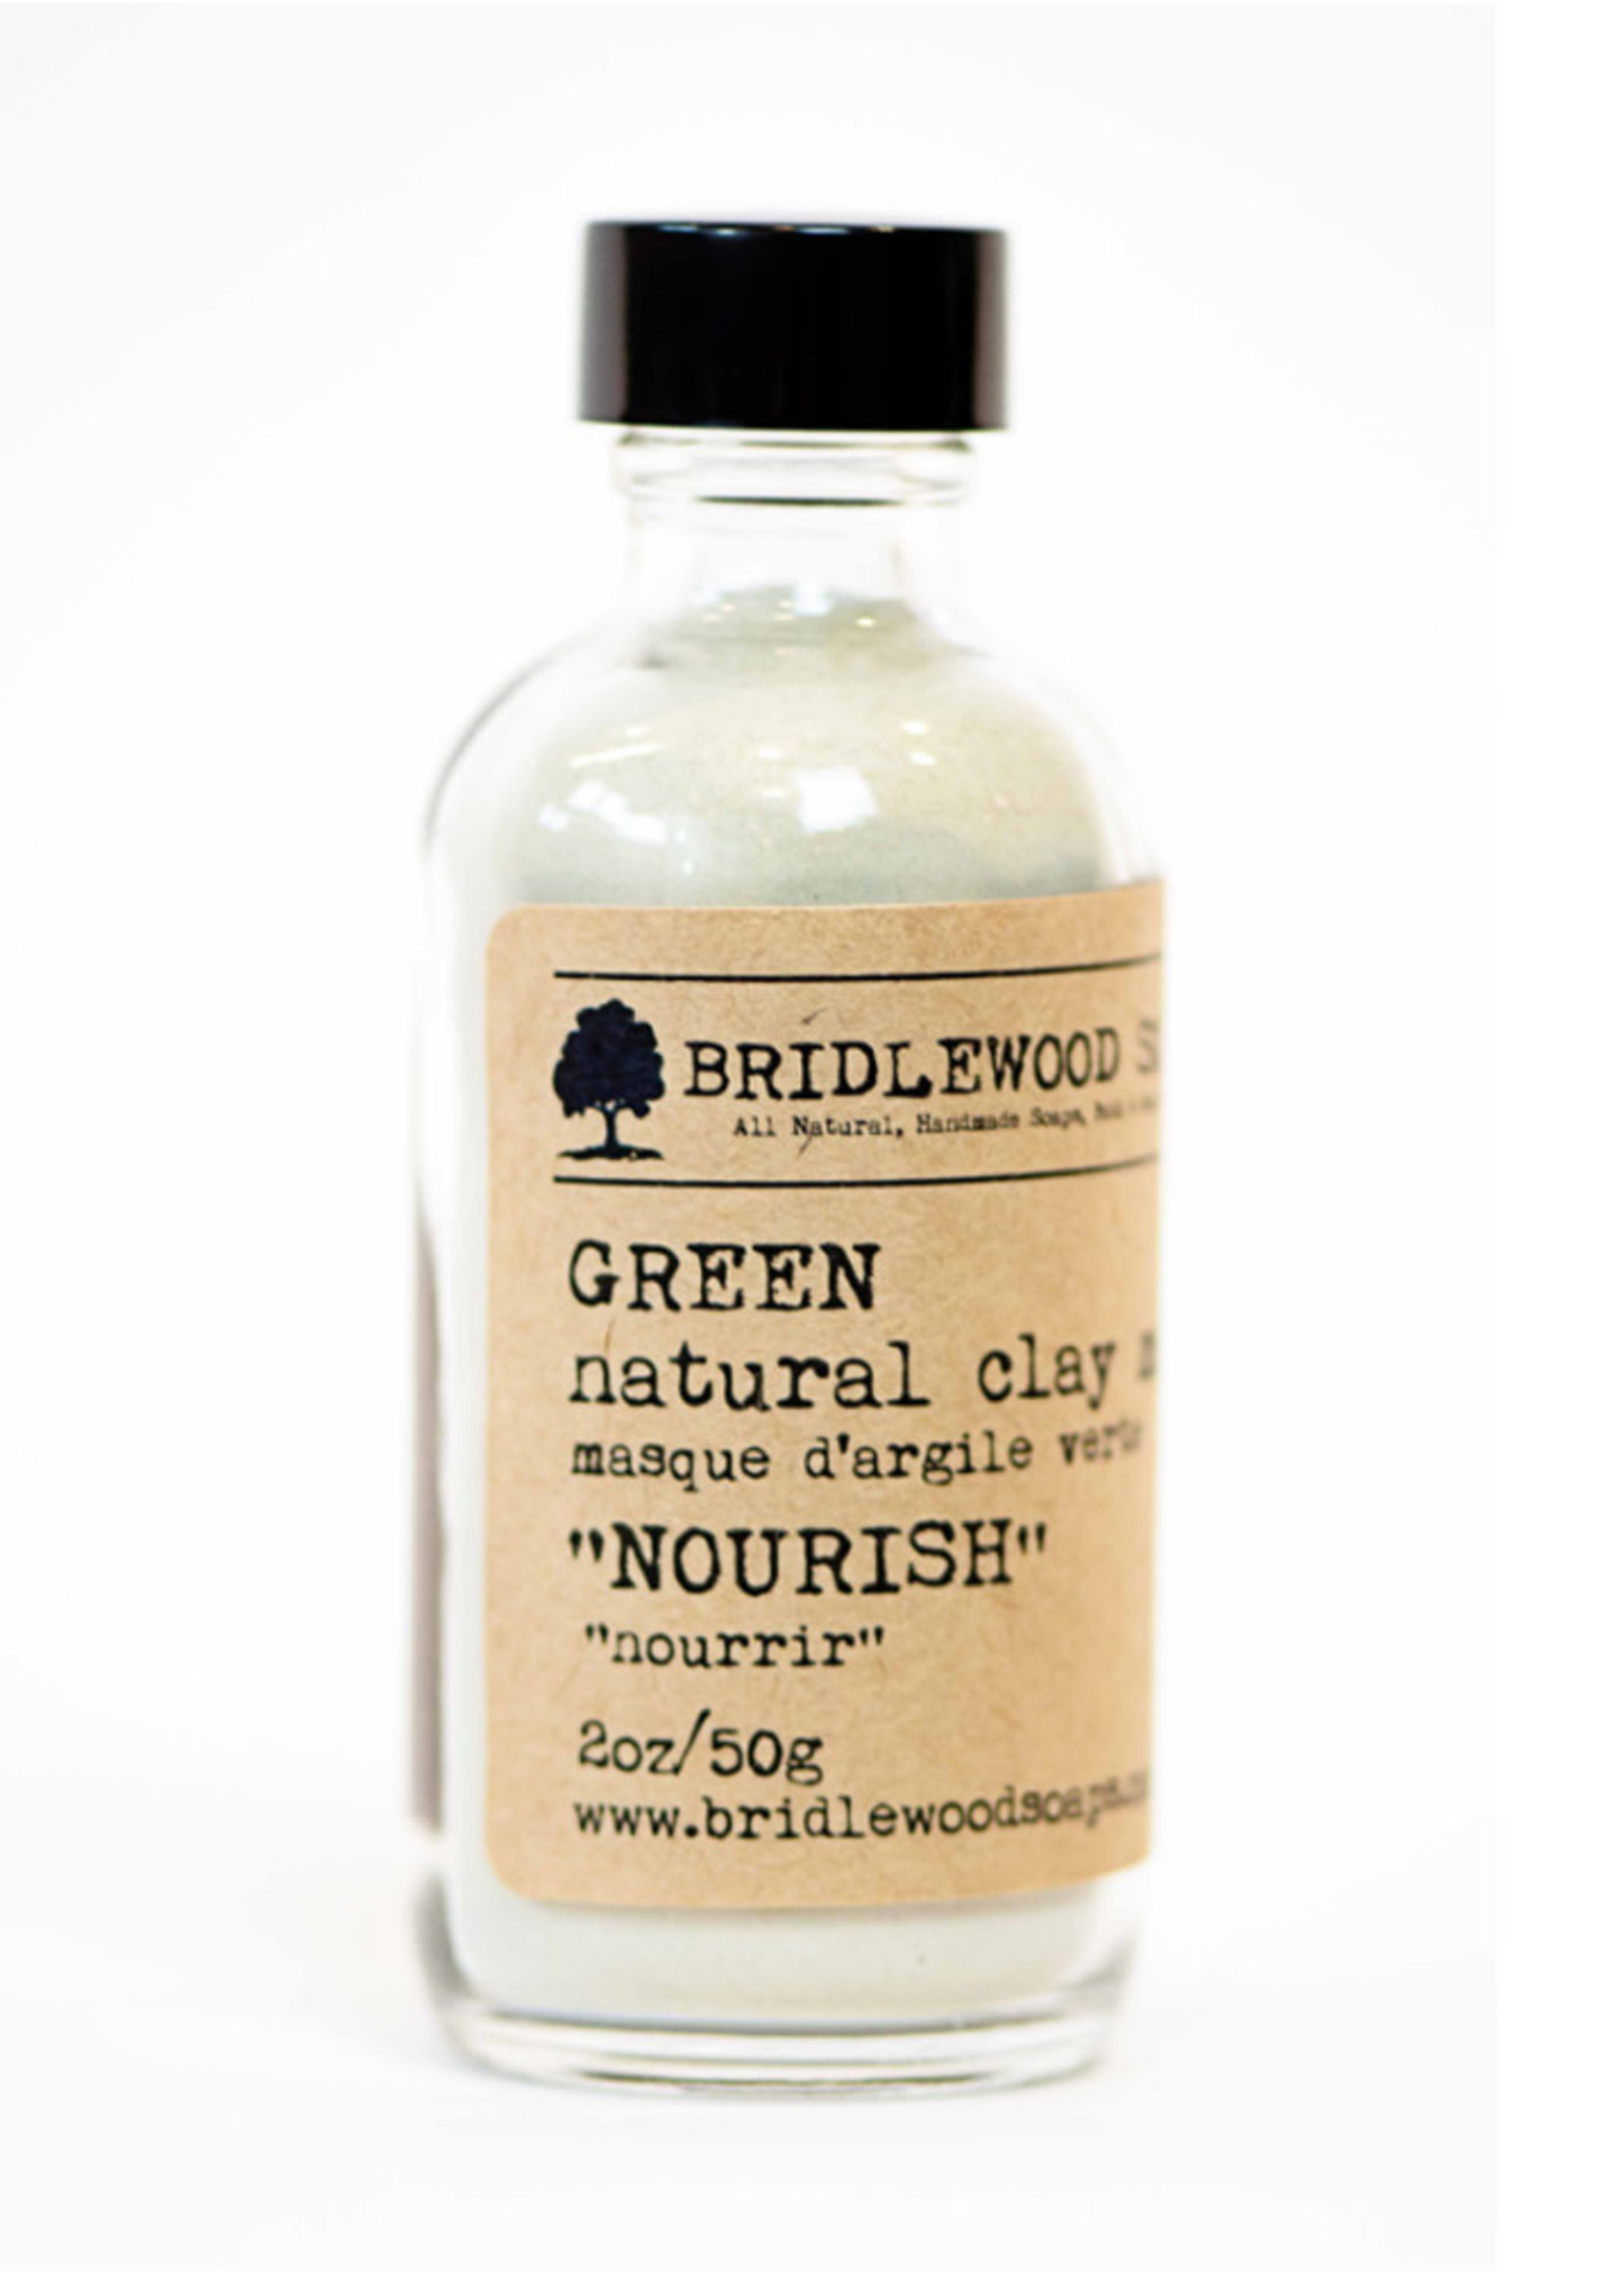 Bridlewood Soaps Green Clay - Nourish Face Mask